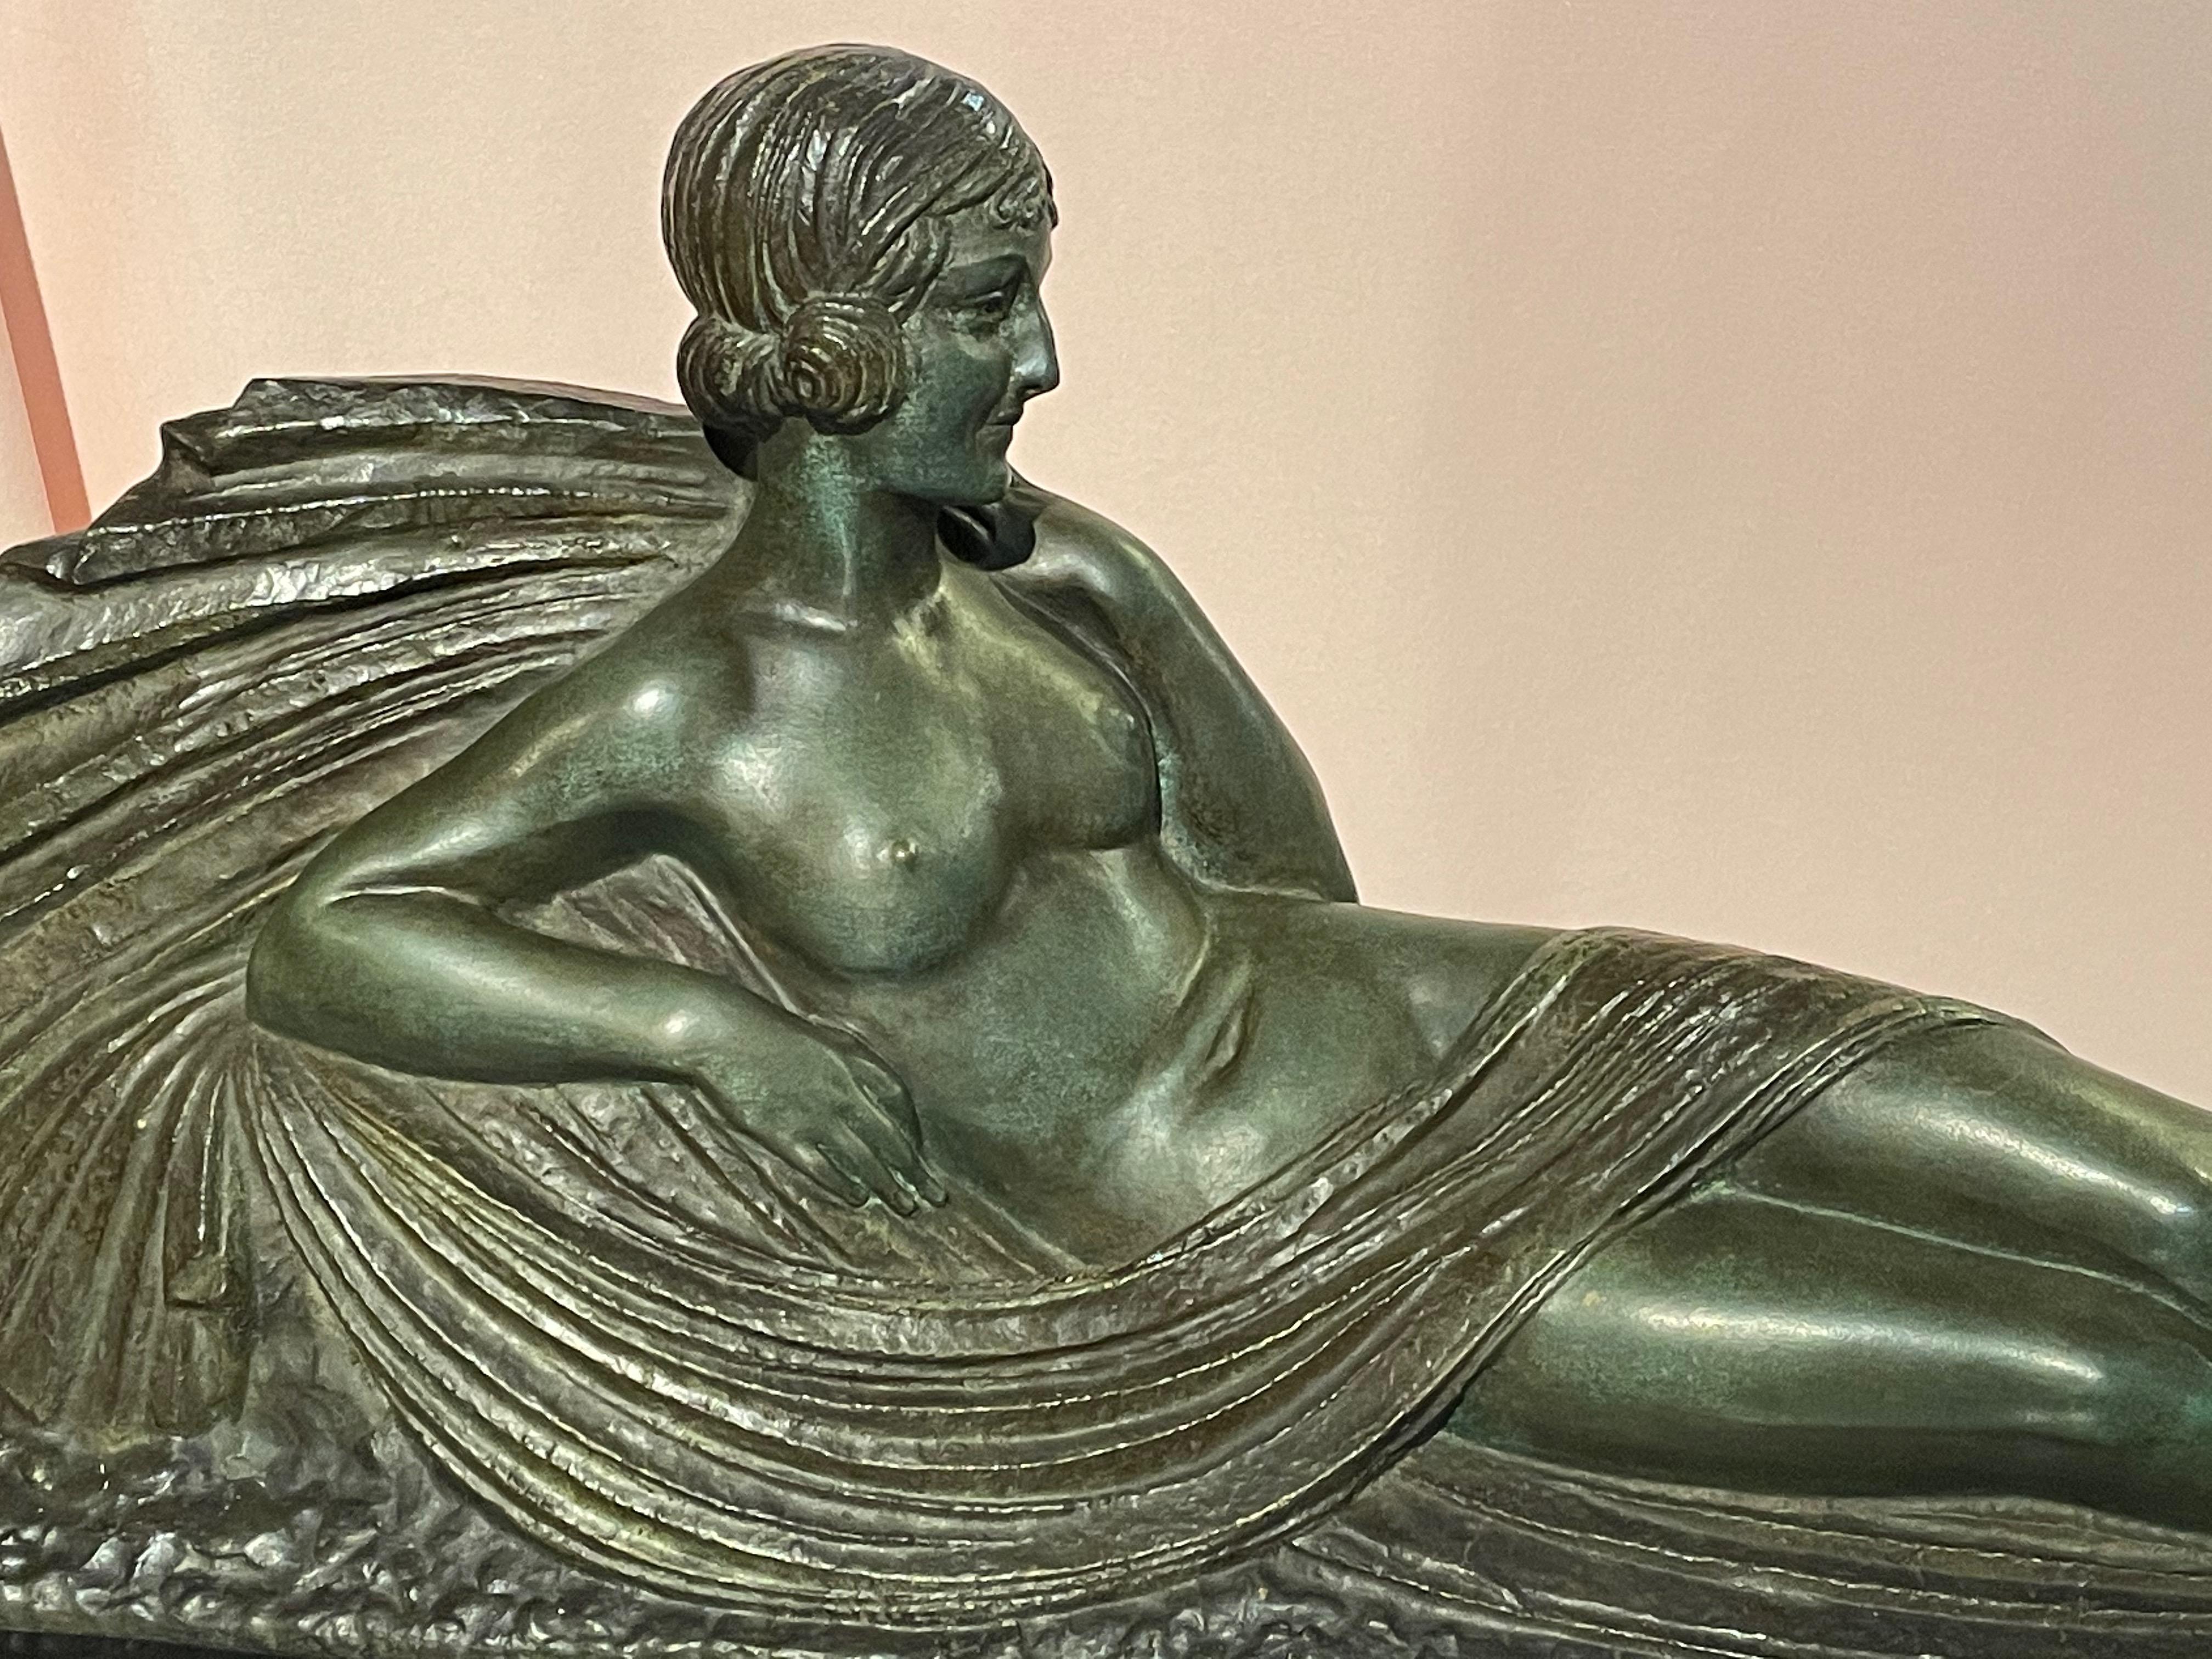 An Art Deco bronze sculpture by Darcles entitled “Nu Allonge” (Reclining Nude) on a marble base. Created in 1925 and embodying all the stylistic elements of the Deco Era and executed by the master sculptor “Darcles.” The period hairstyle in rolls